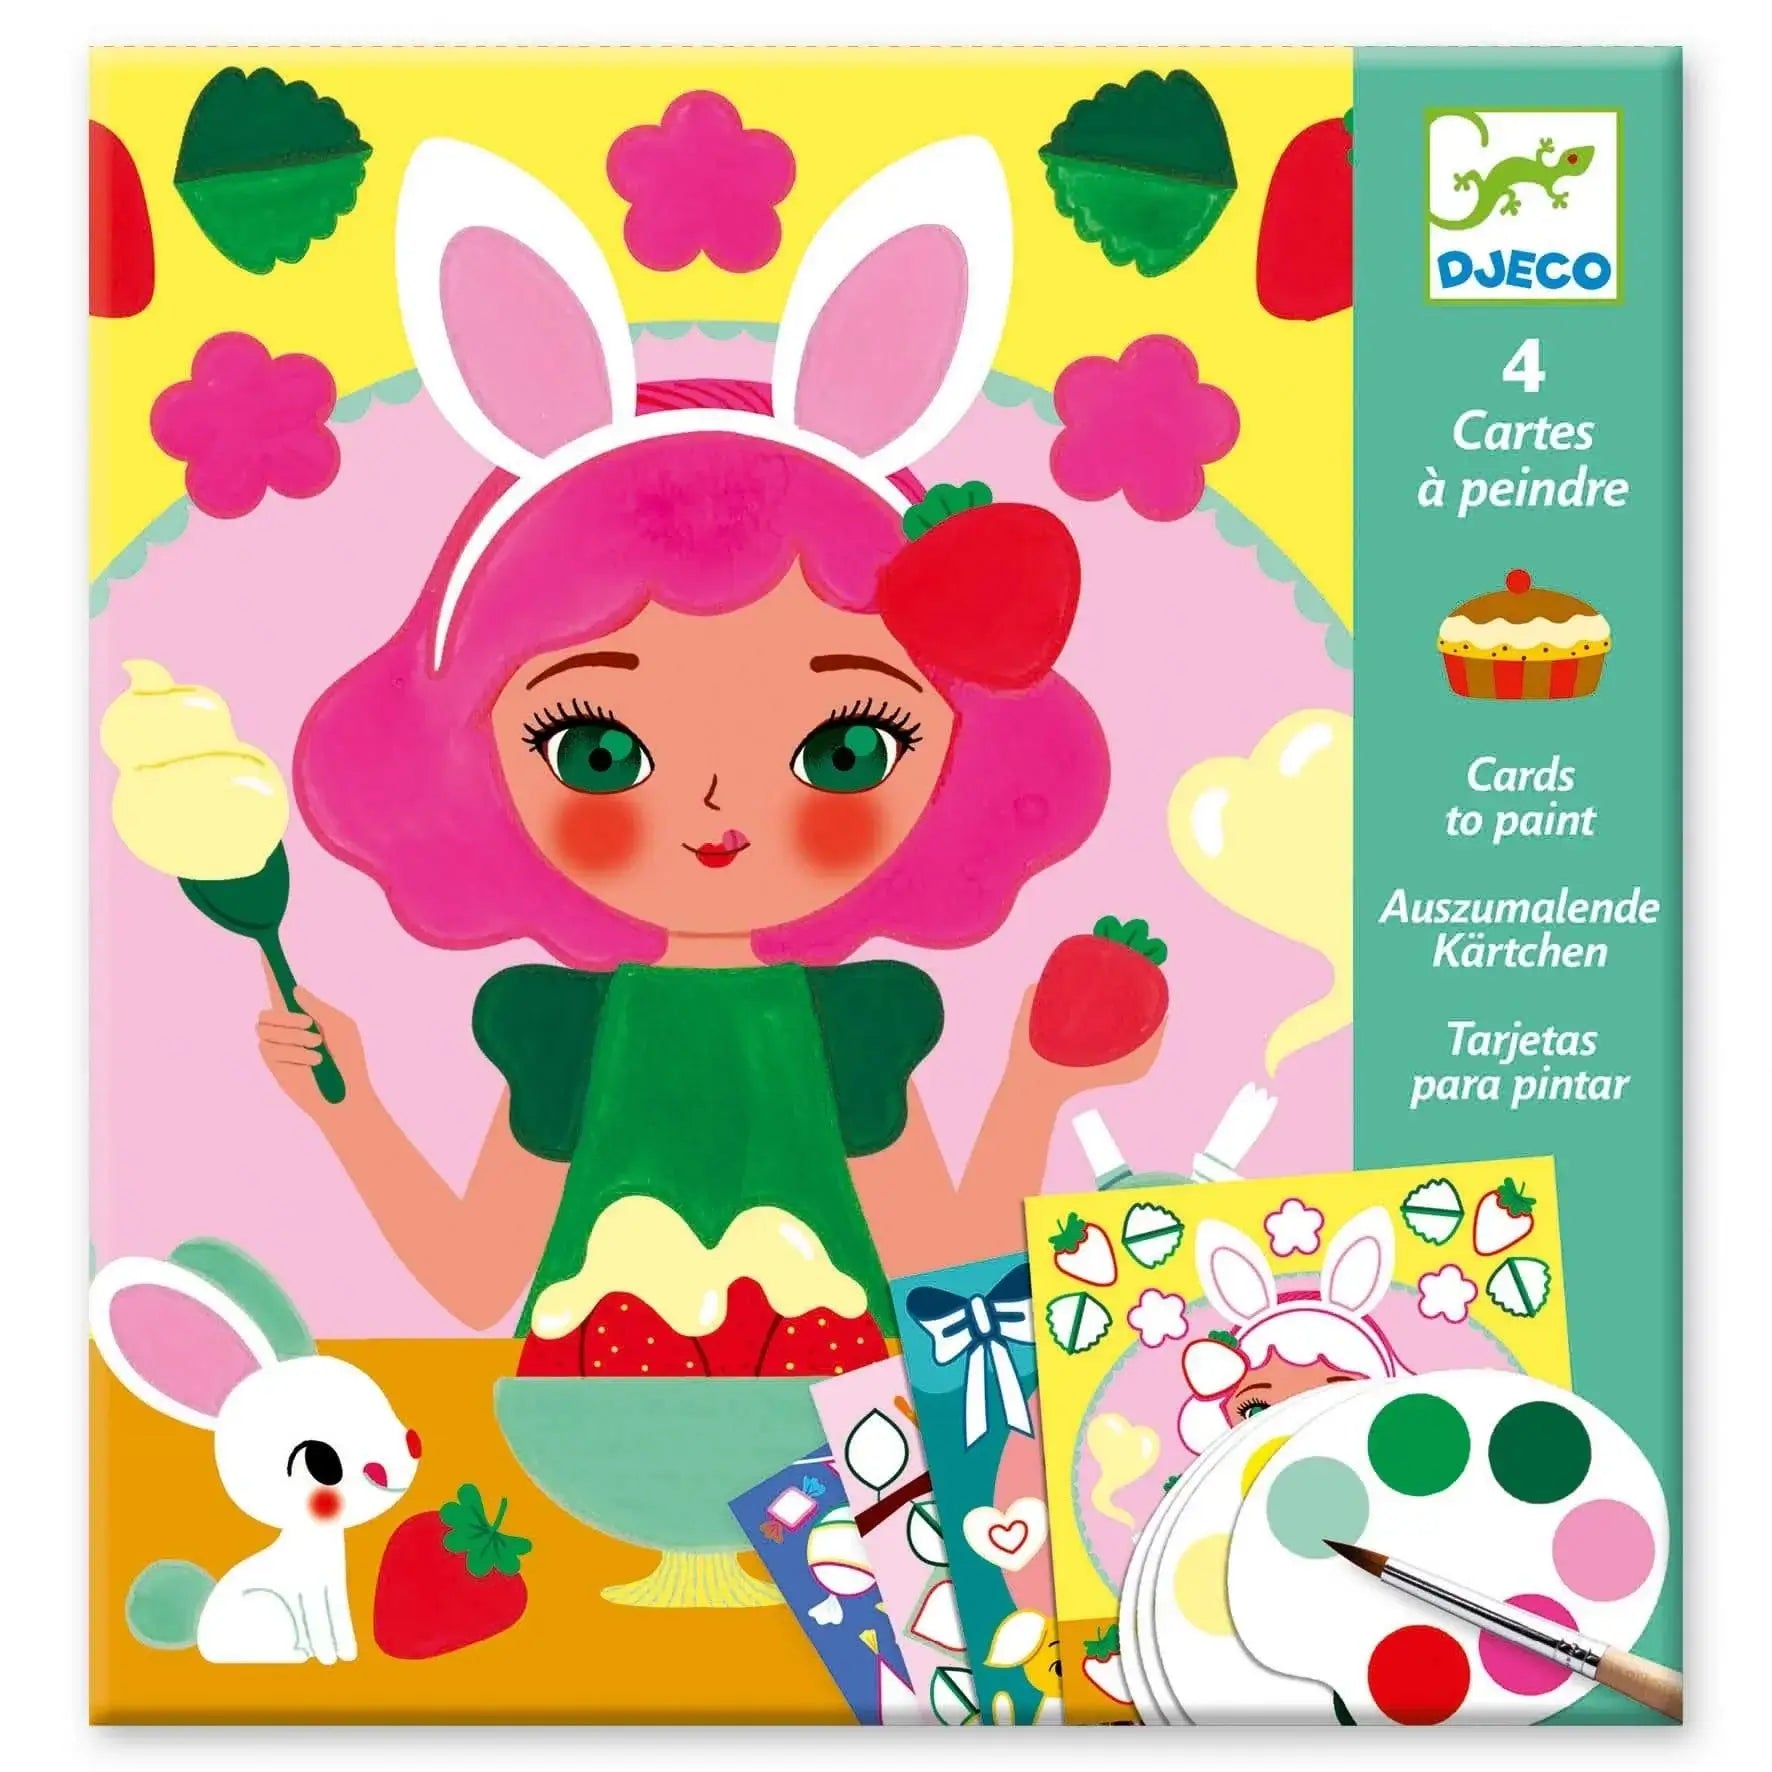 Snack Time Painting Surprise art kit